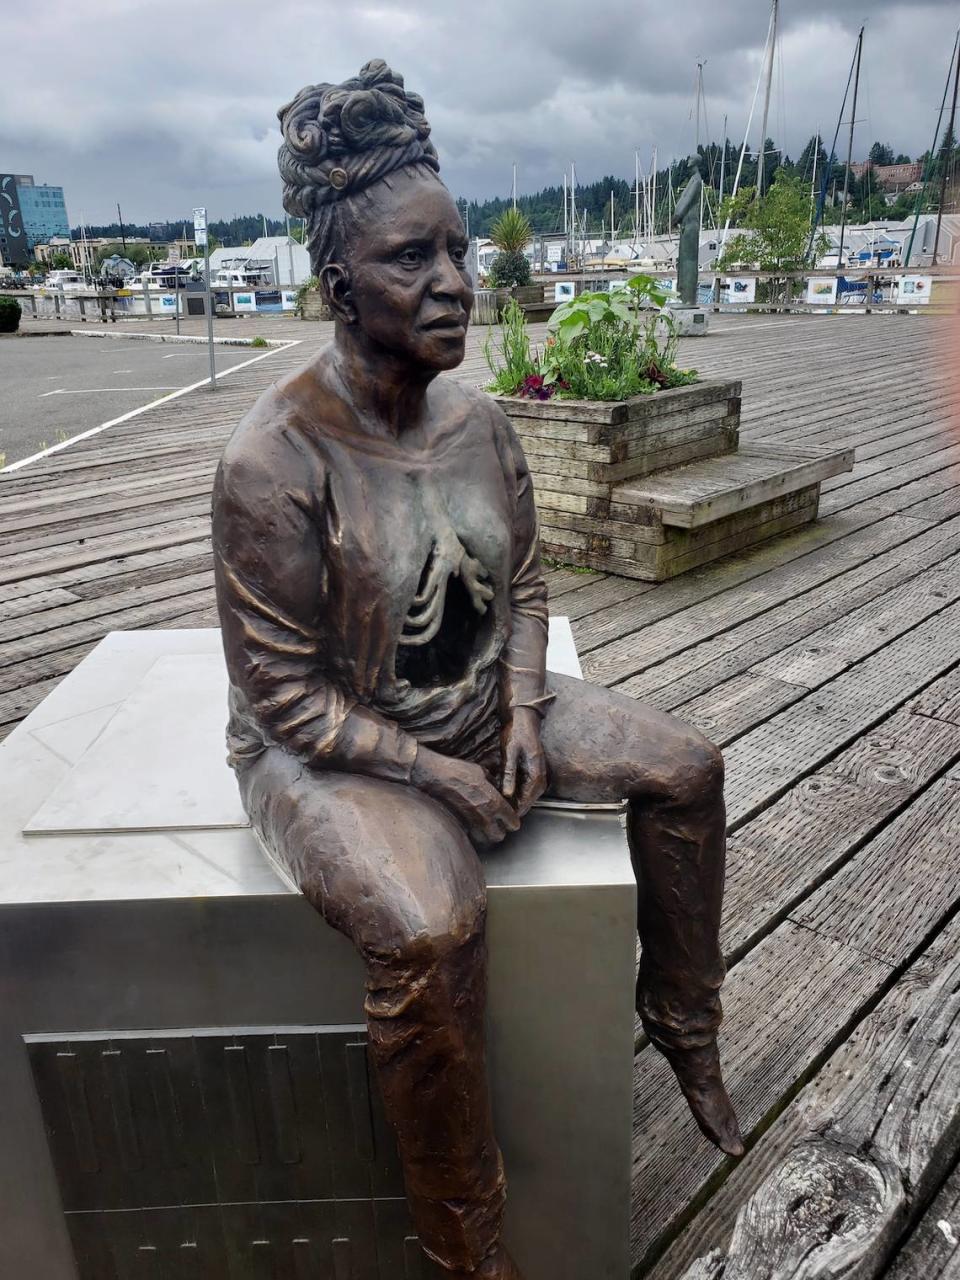 Aisha Harrison’s “Woman With Graves at Her Back” was part of the 2021 Percival Plinth Project. It won the People’s Choice Award, and on Tuesday, the Olympia City Council authorized the purchase of the sculpture for its permanent public art collection.